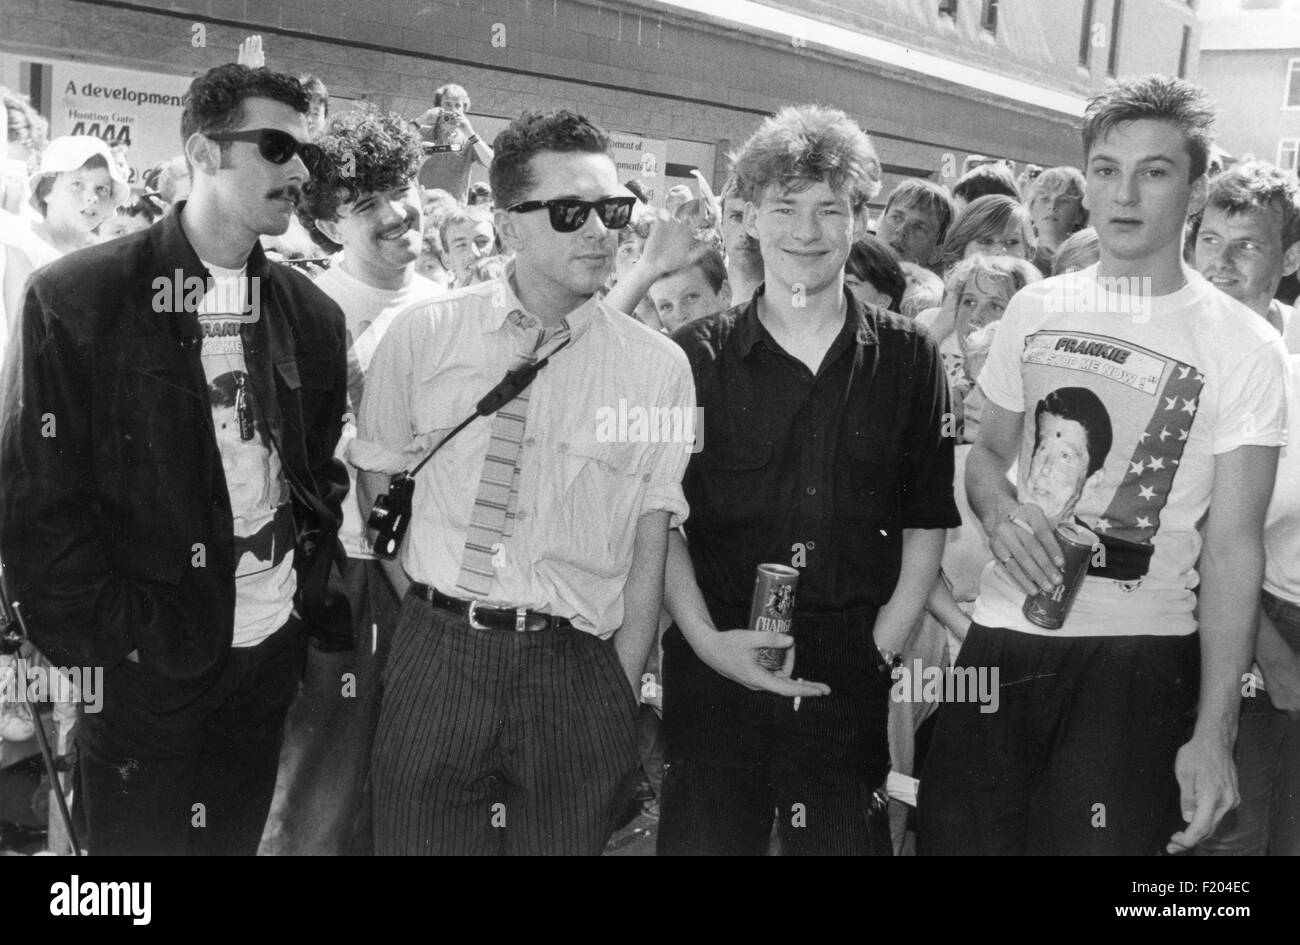 Frankie goes to hollywood Black and White Stock Photos & Images - Alamy